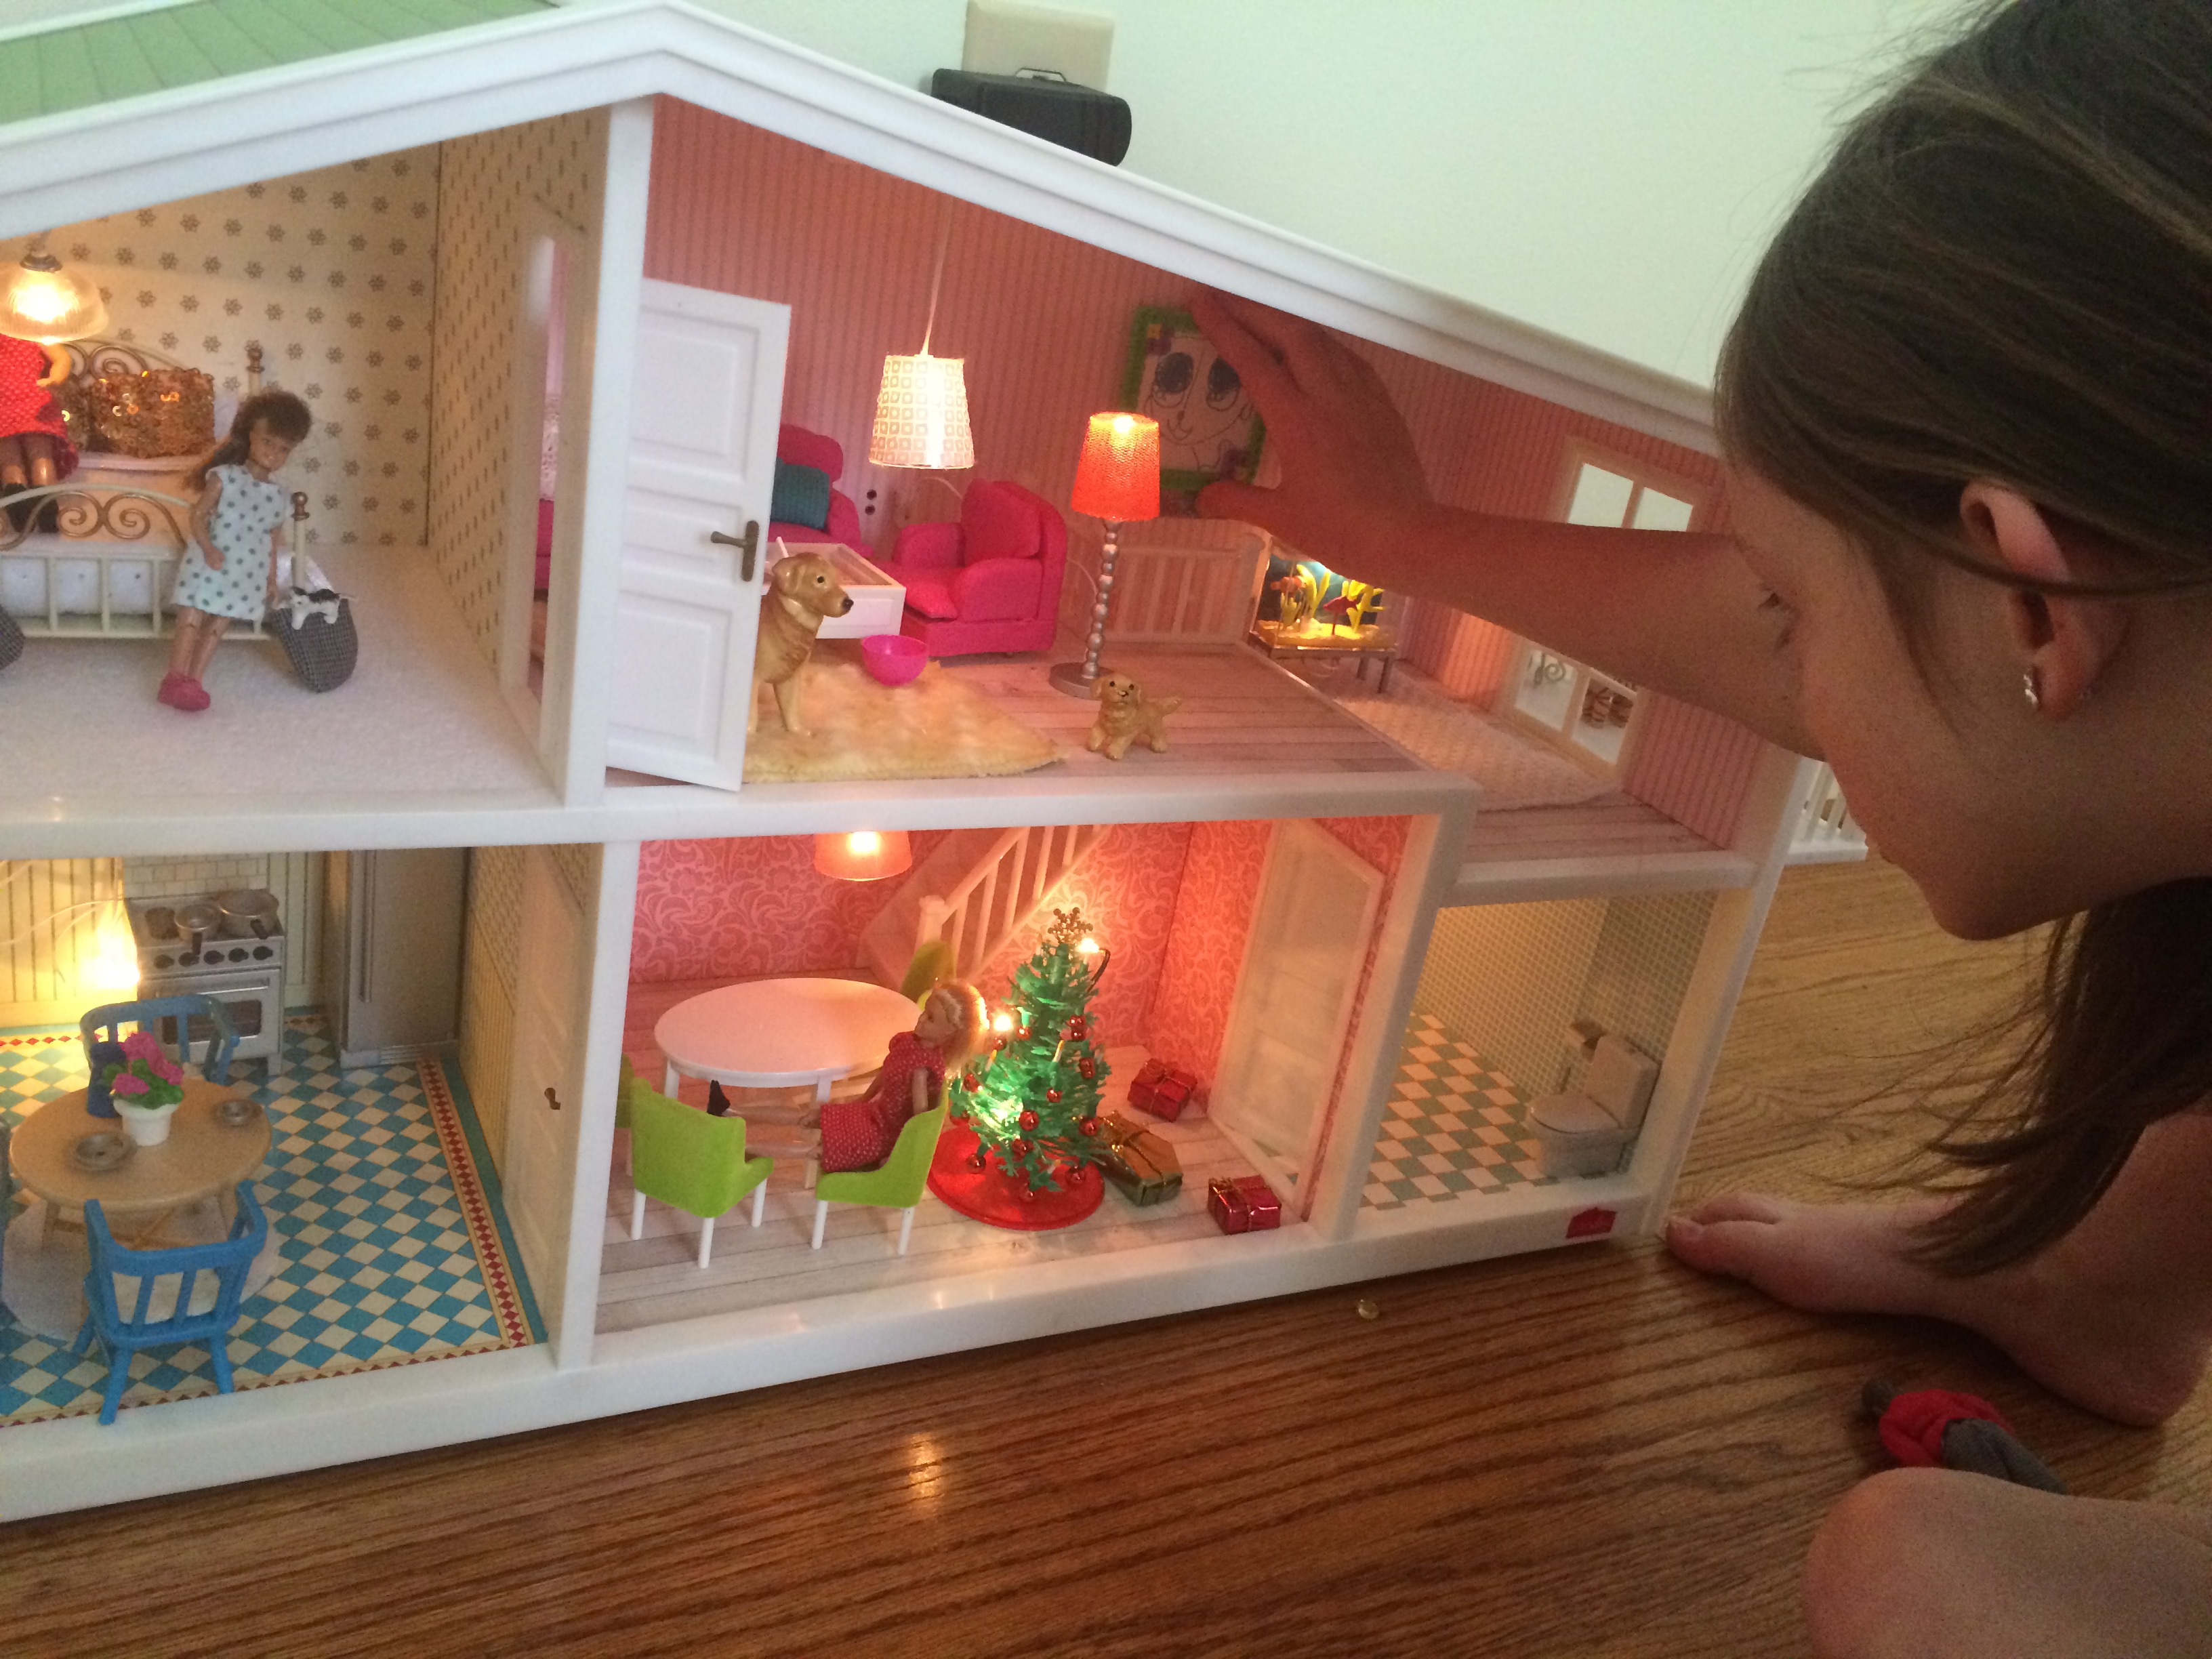 Lundby dollhouse promotes pretend play and learning